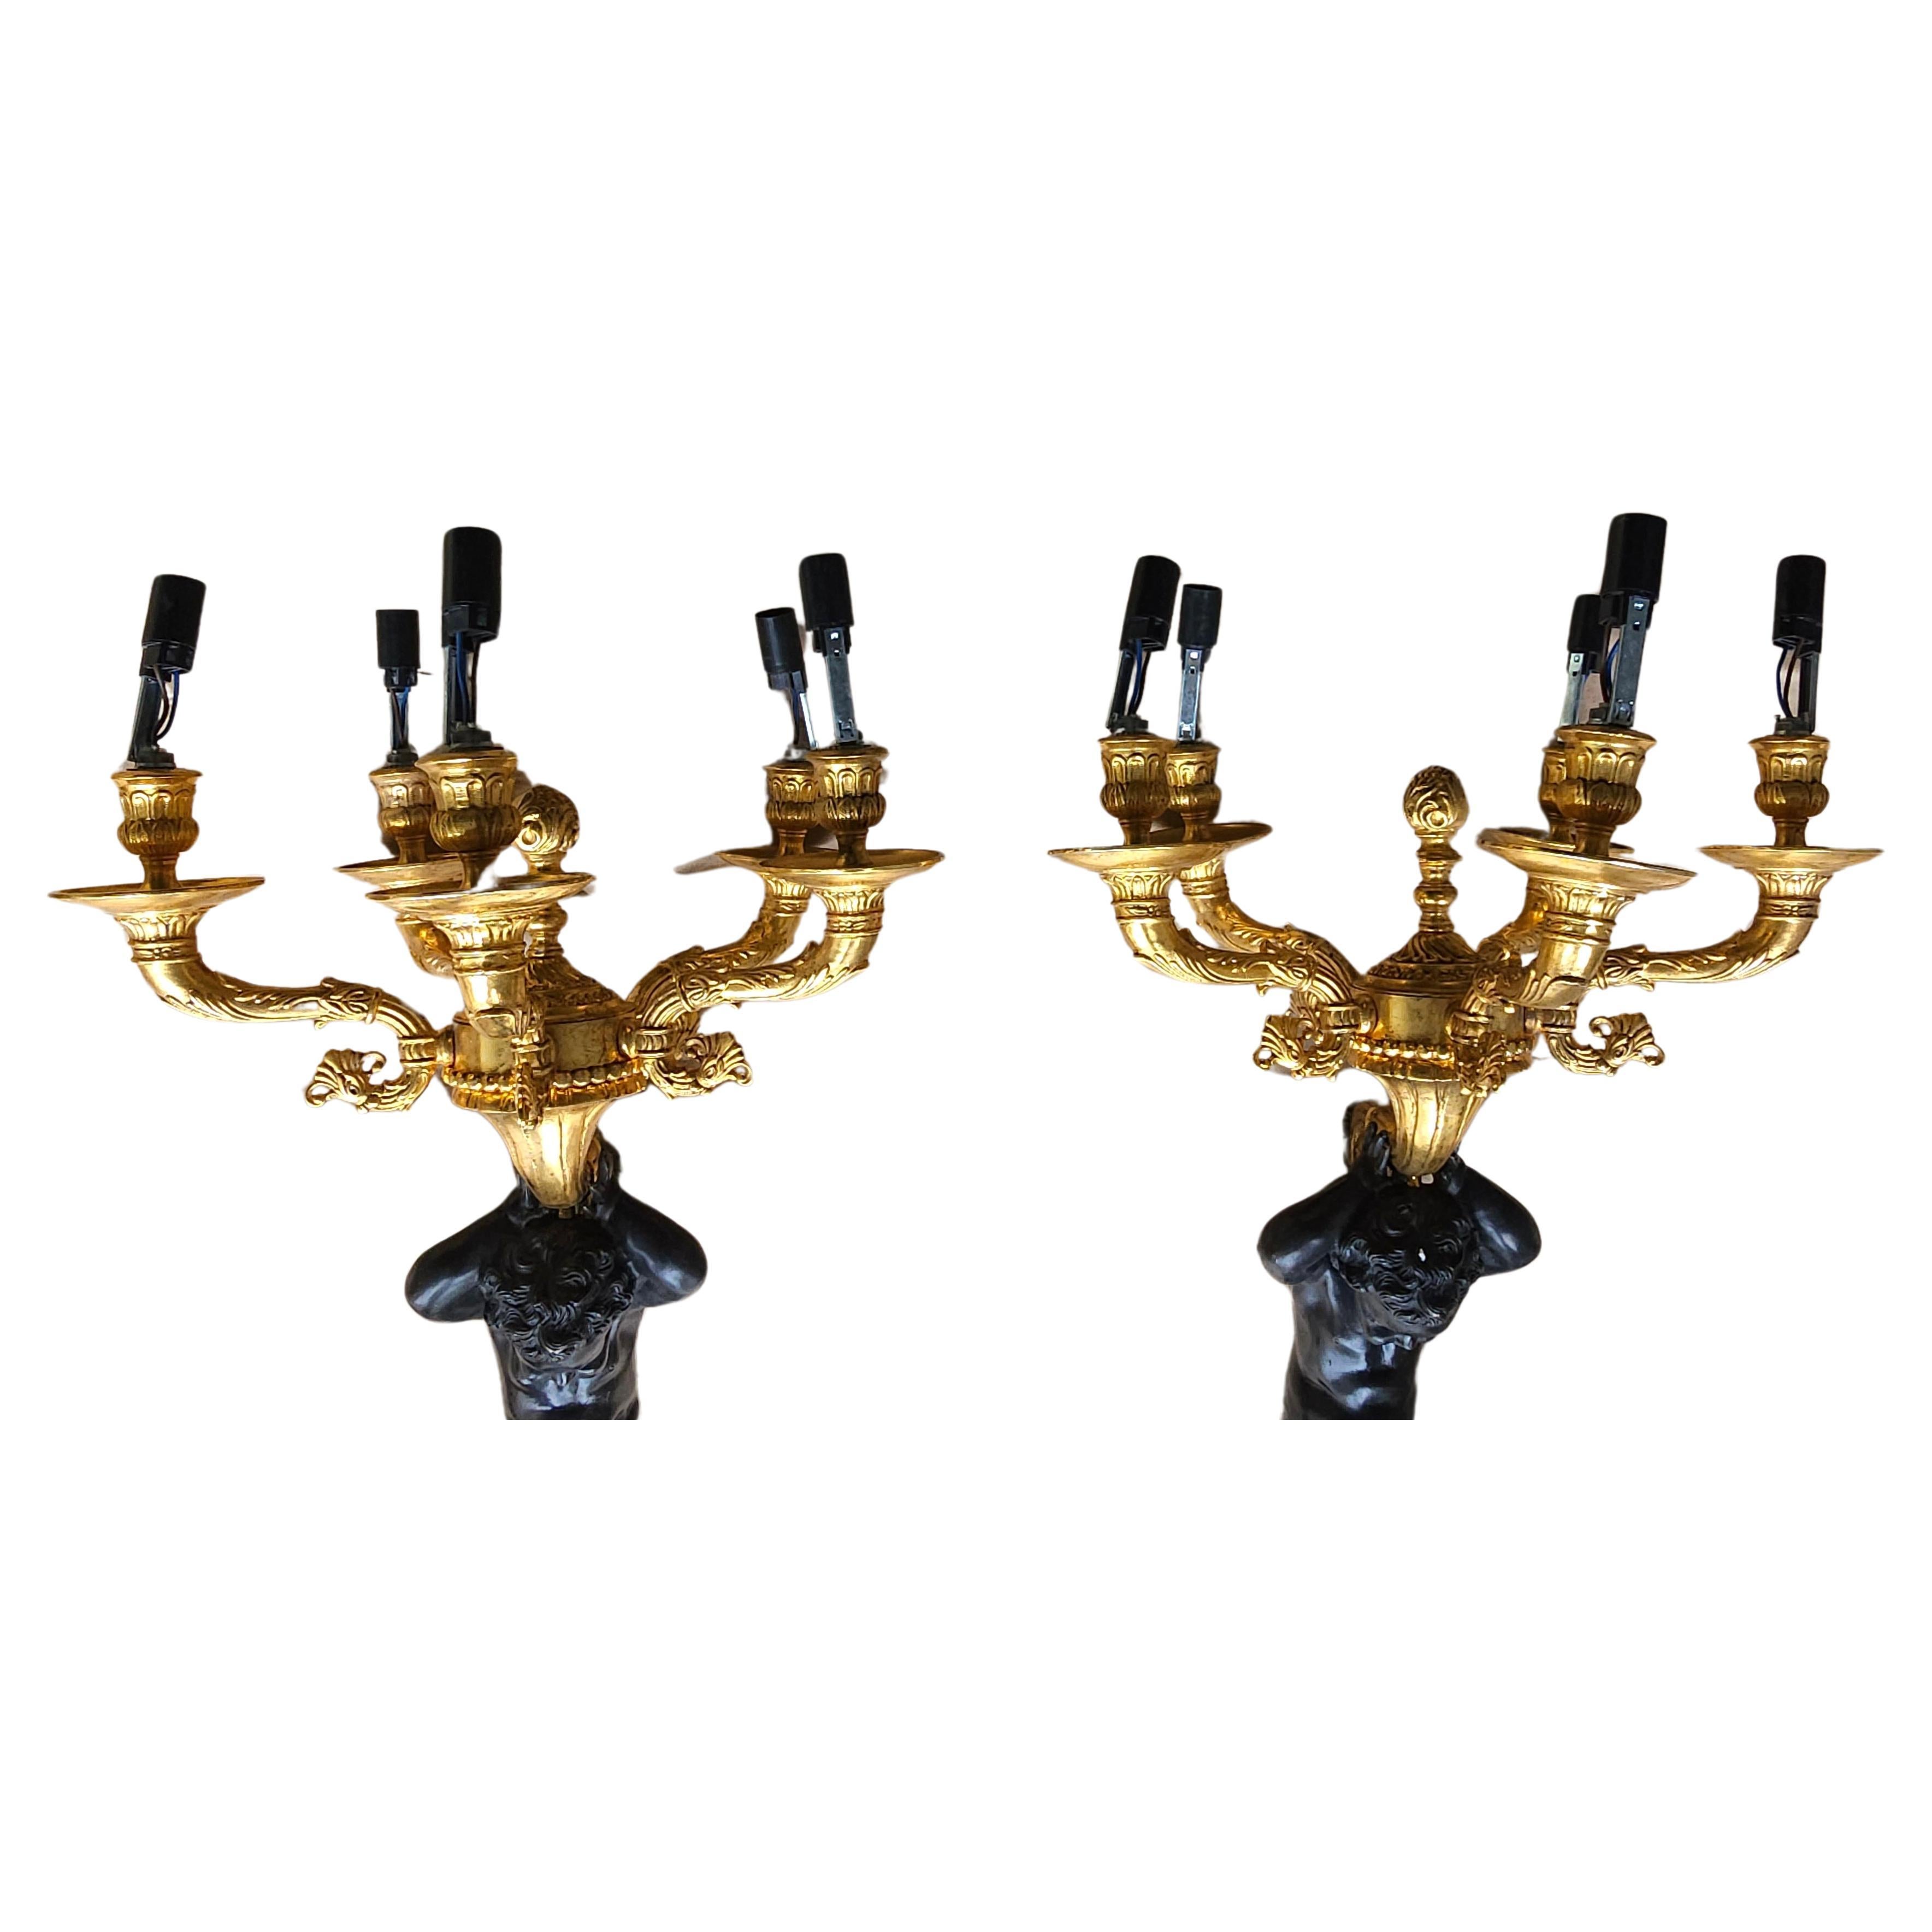 Edward F. Caldwell Massive Patinated Bronze Triton Figural 5-Light Sconces, Pair In Good Condition For Sale In Germantown, MD